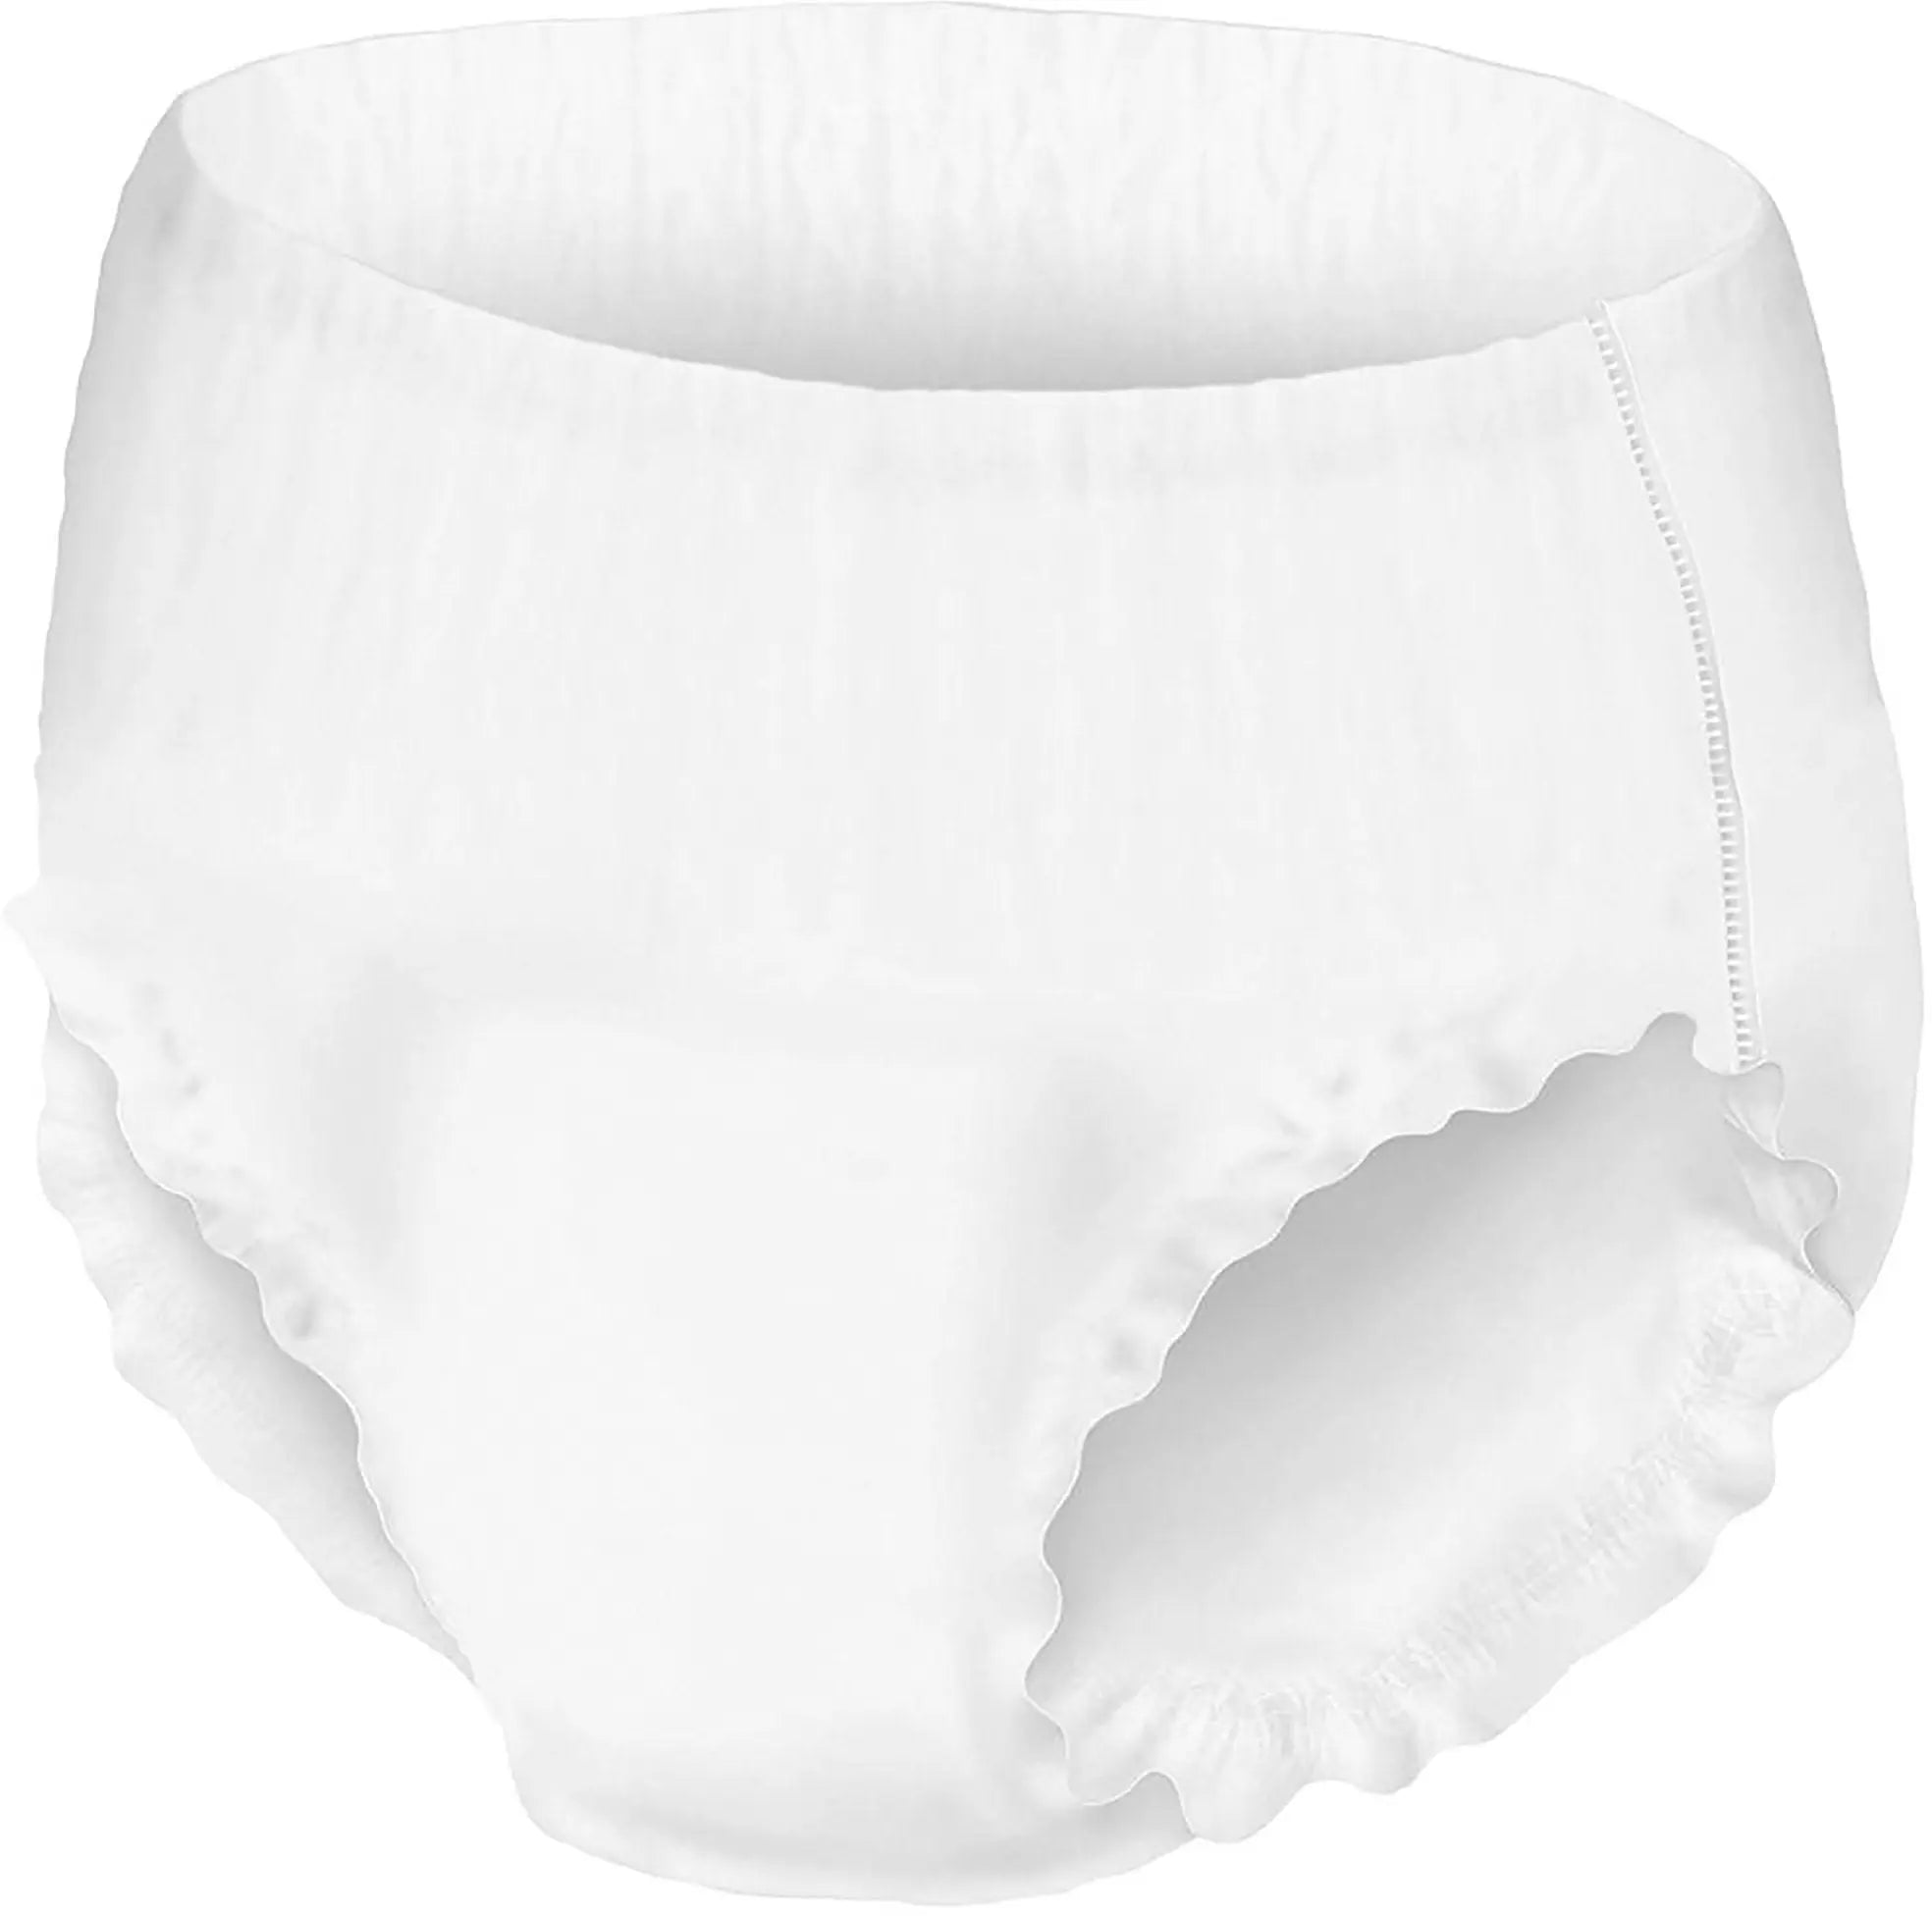 Generic Procare Protective Underwear,Adult Diapers